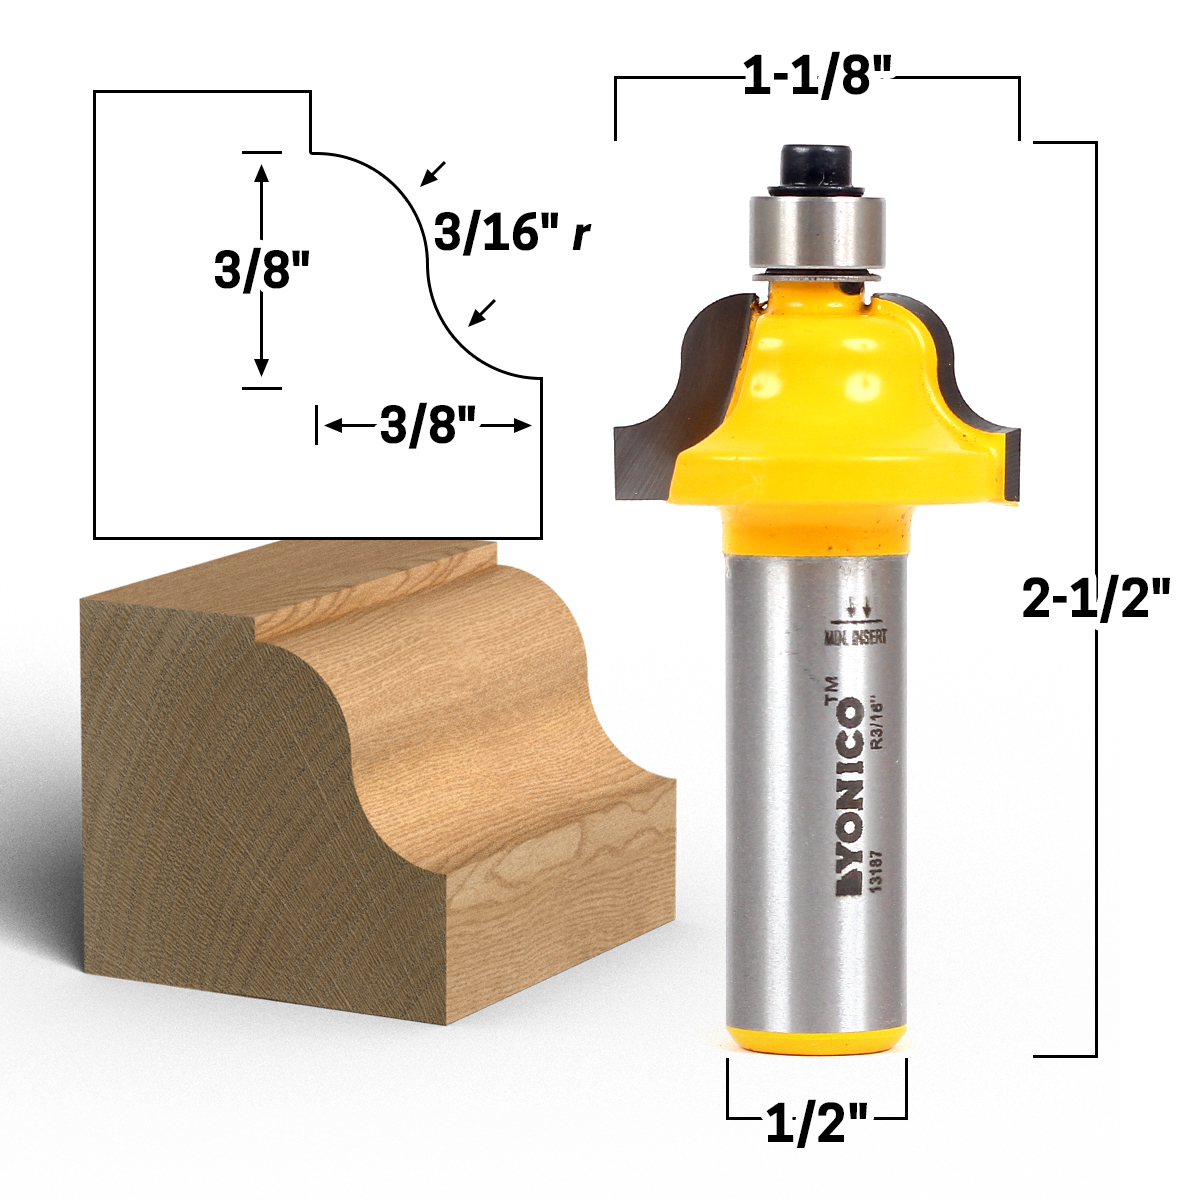 Yonico 13122 5/16" Classical Roman Ogee Edge Forming Router Bit 1/2" Shank 